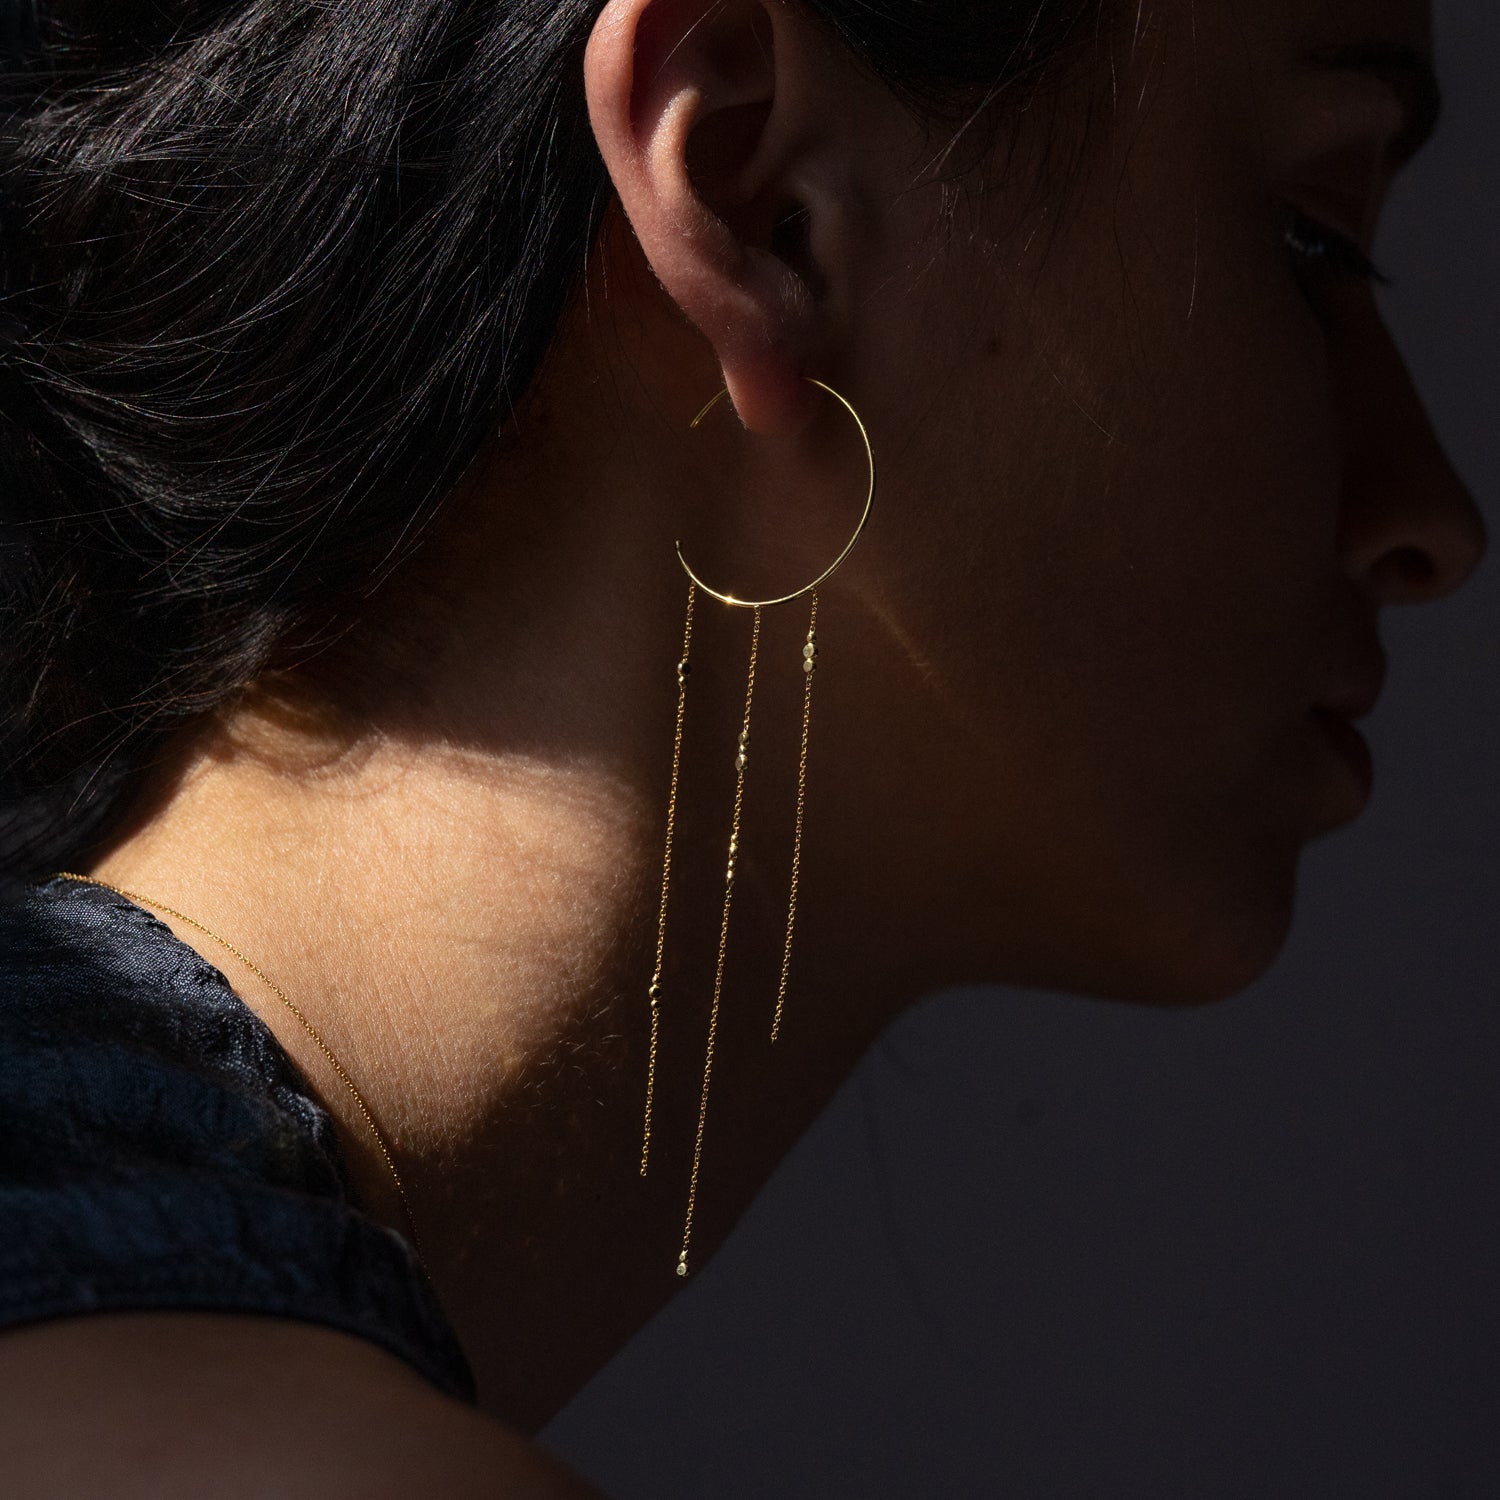 18ct yellow gold hoop earrings with 3 strands of fine chain with Bits and Bobs on model